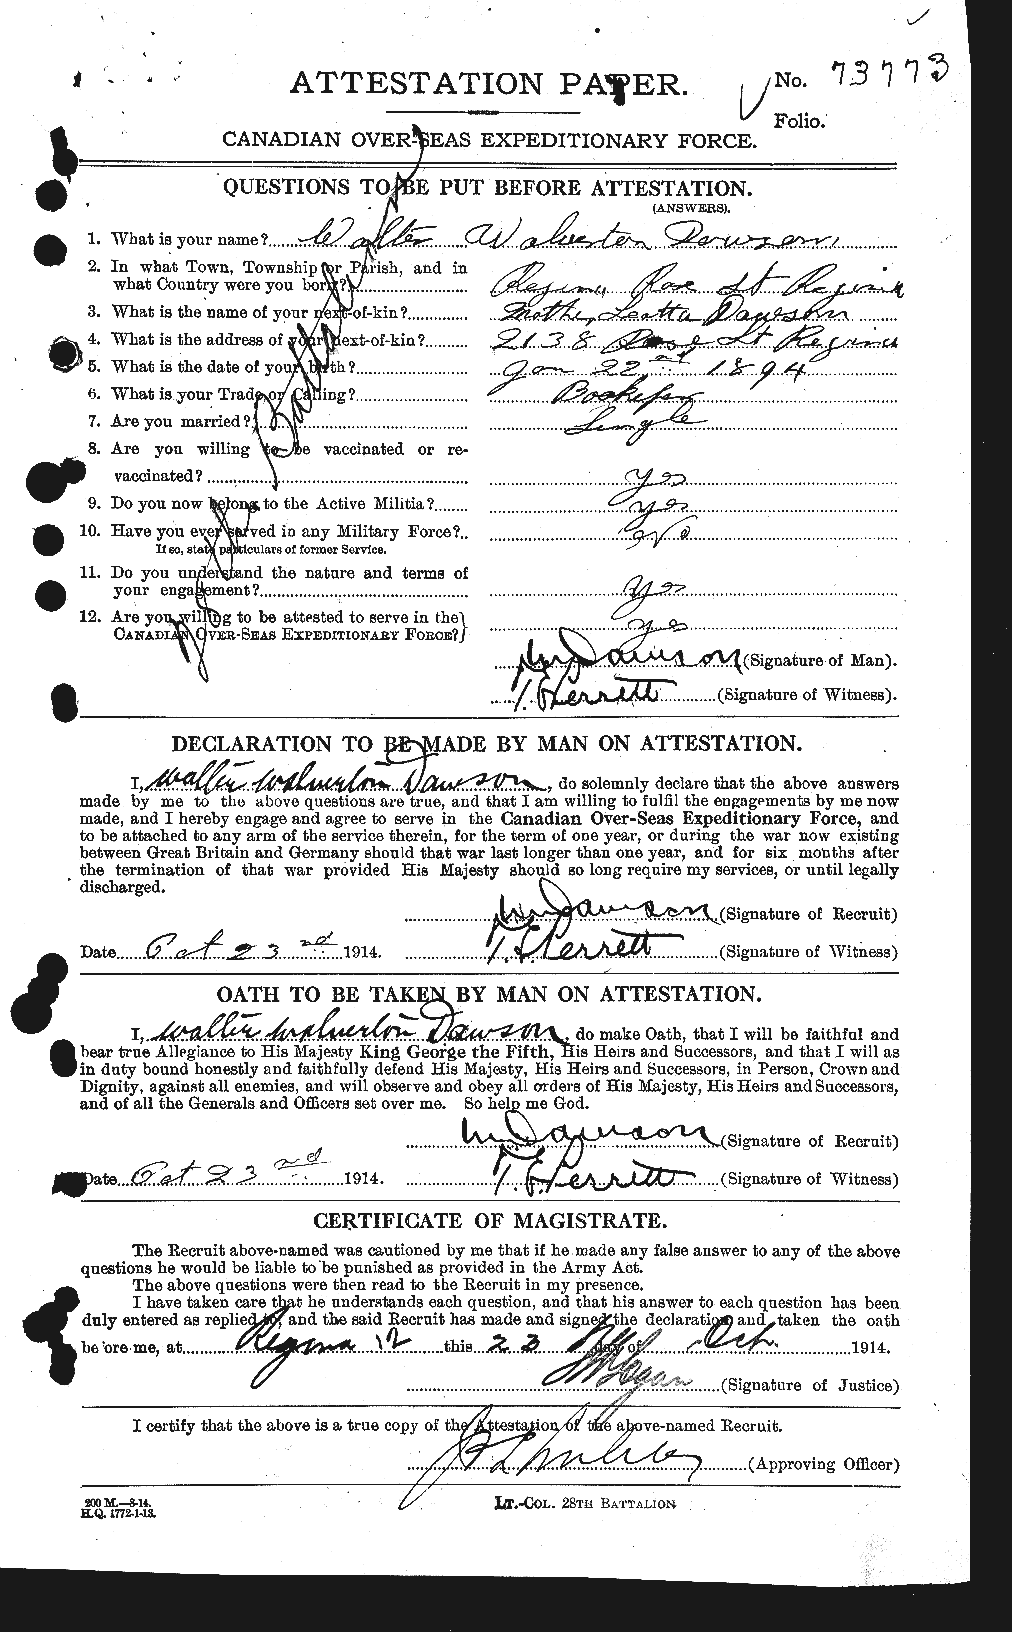 Personnel Records of the First World War - CEF 282853a